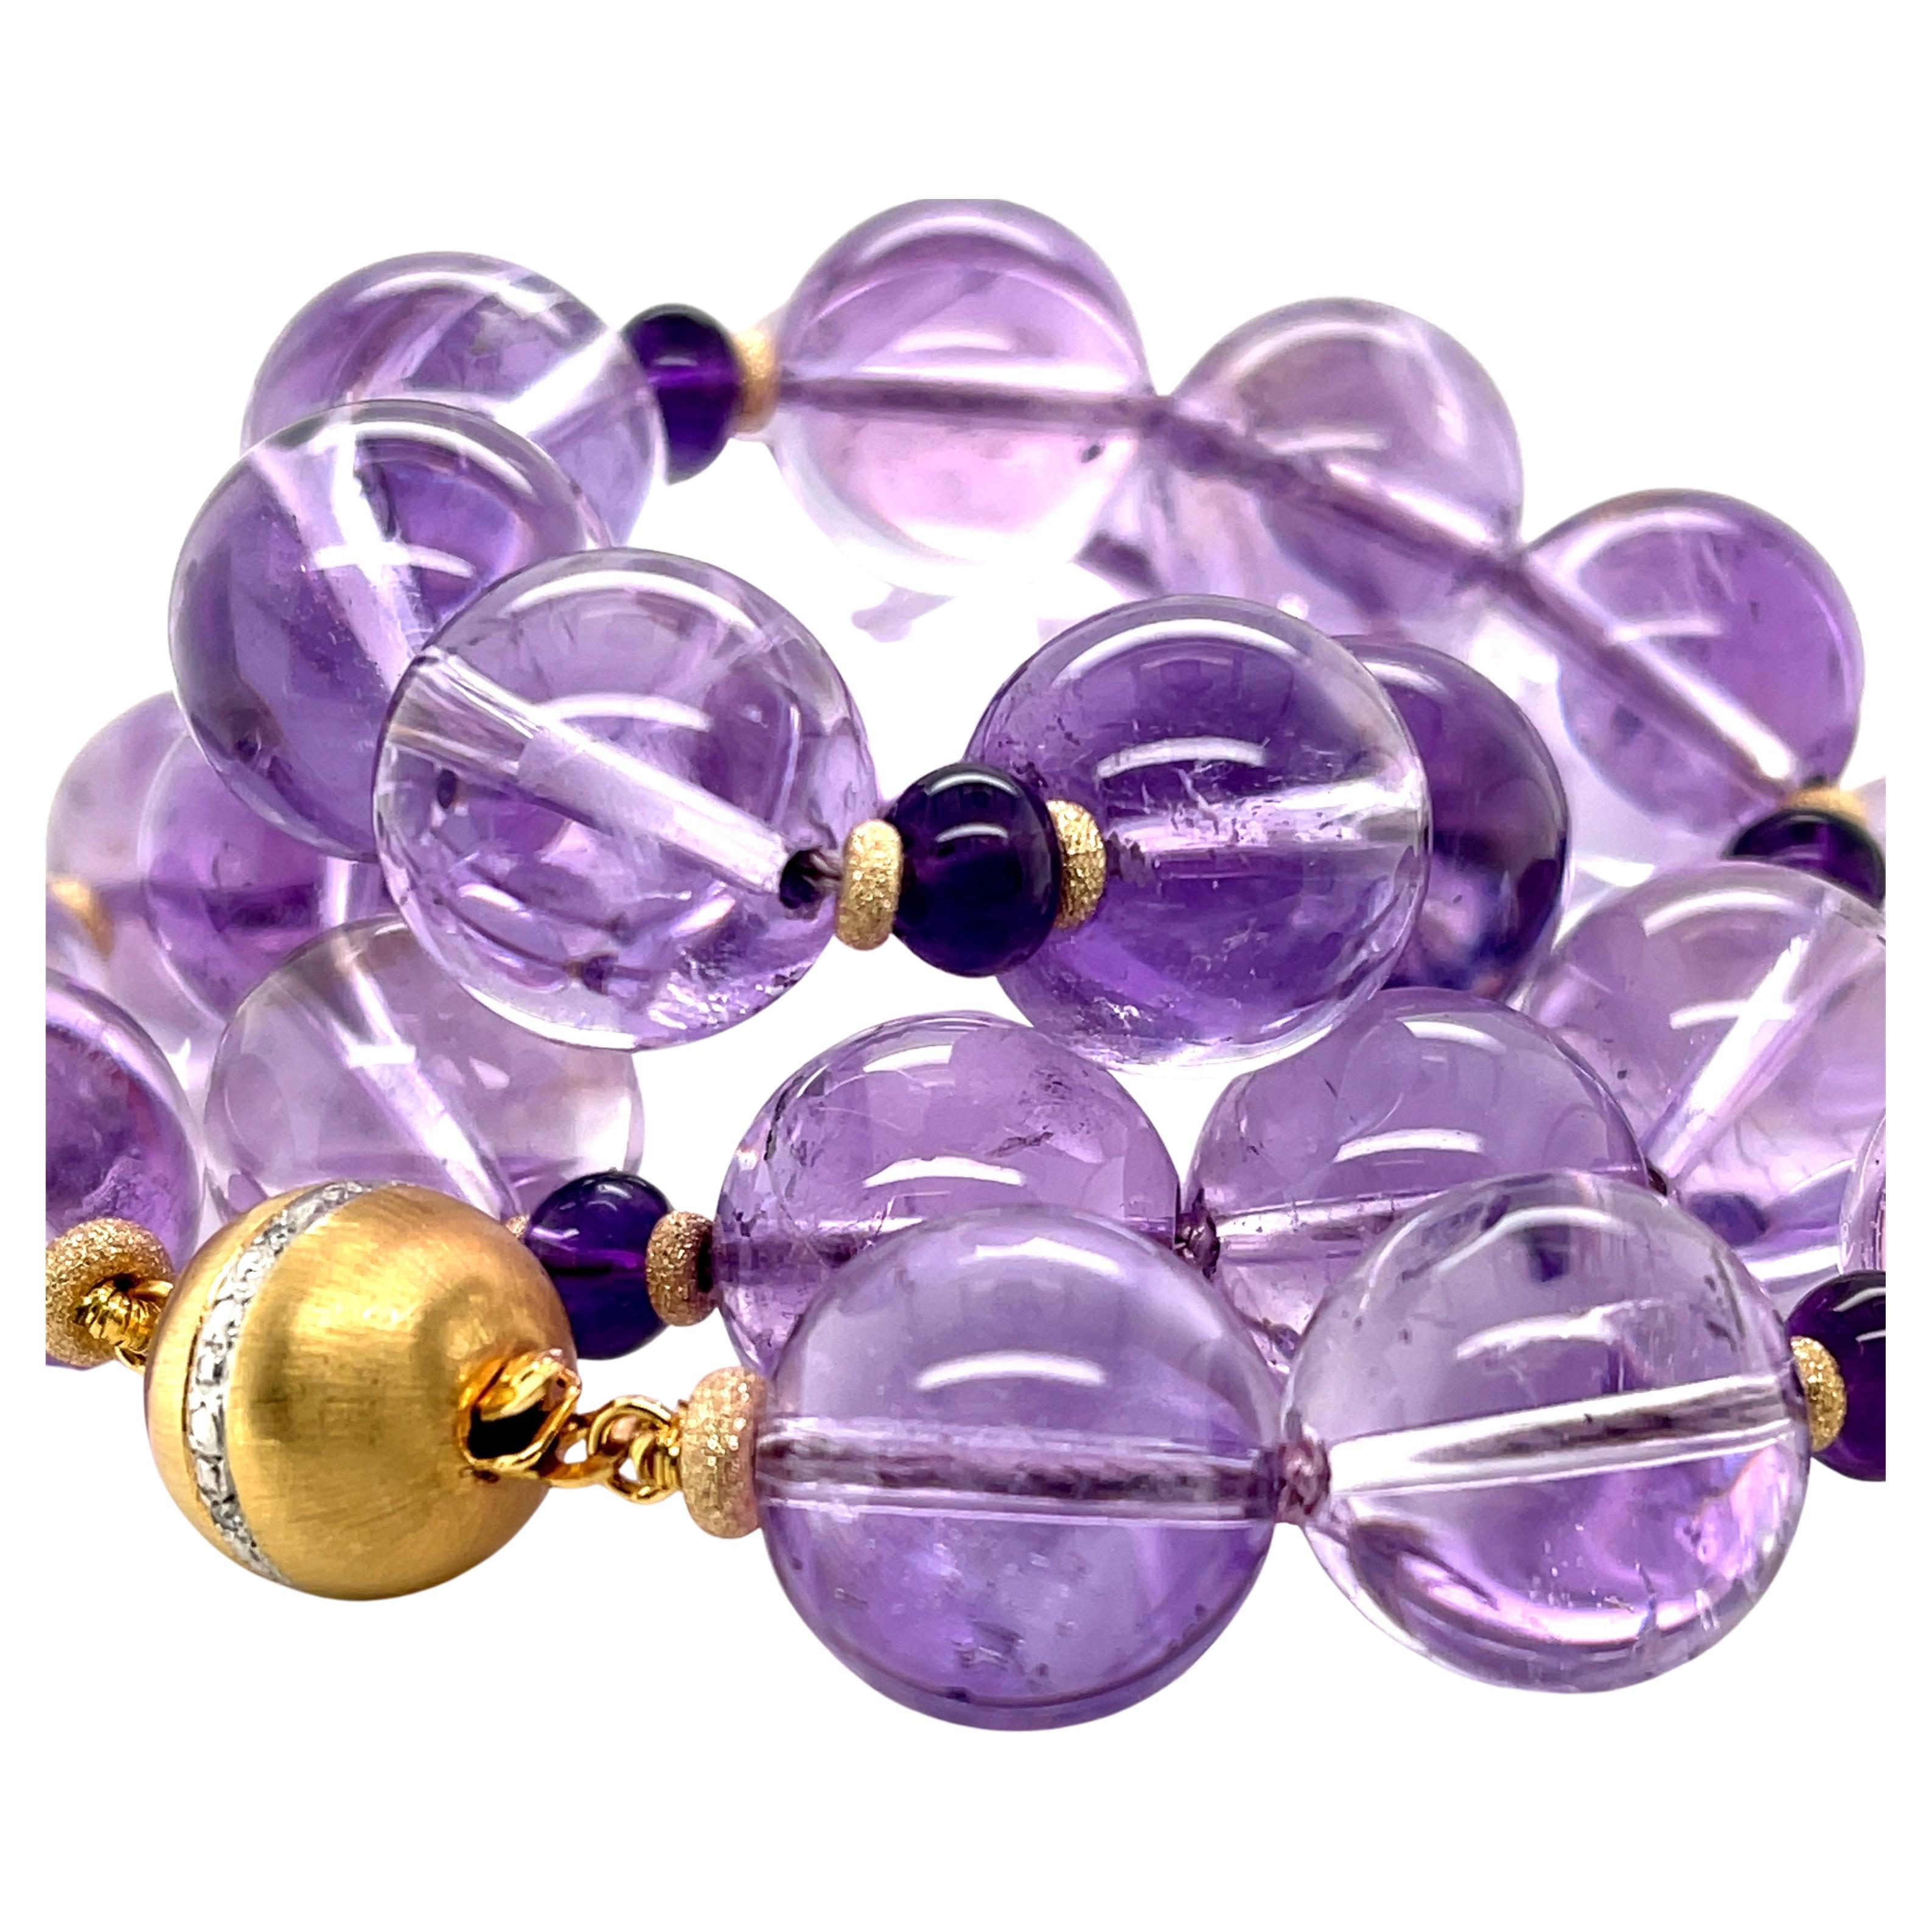 This gorgeous strand of beautifully matched Rose de France amethyst beads is sure to make you smile! Rose de France amethyst is known for its lovely pastel purple color, and these impressive 14mm round beads are simply stunning! Amethyst has been